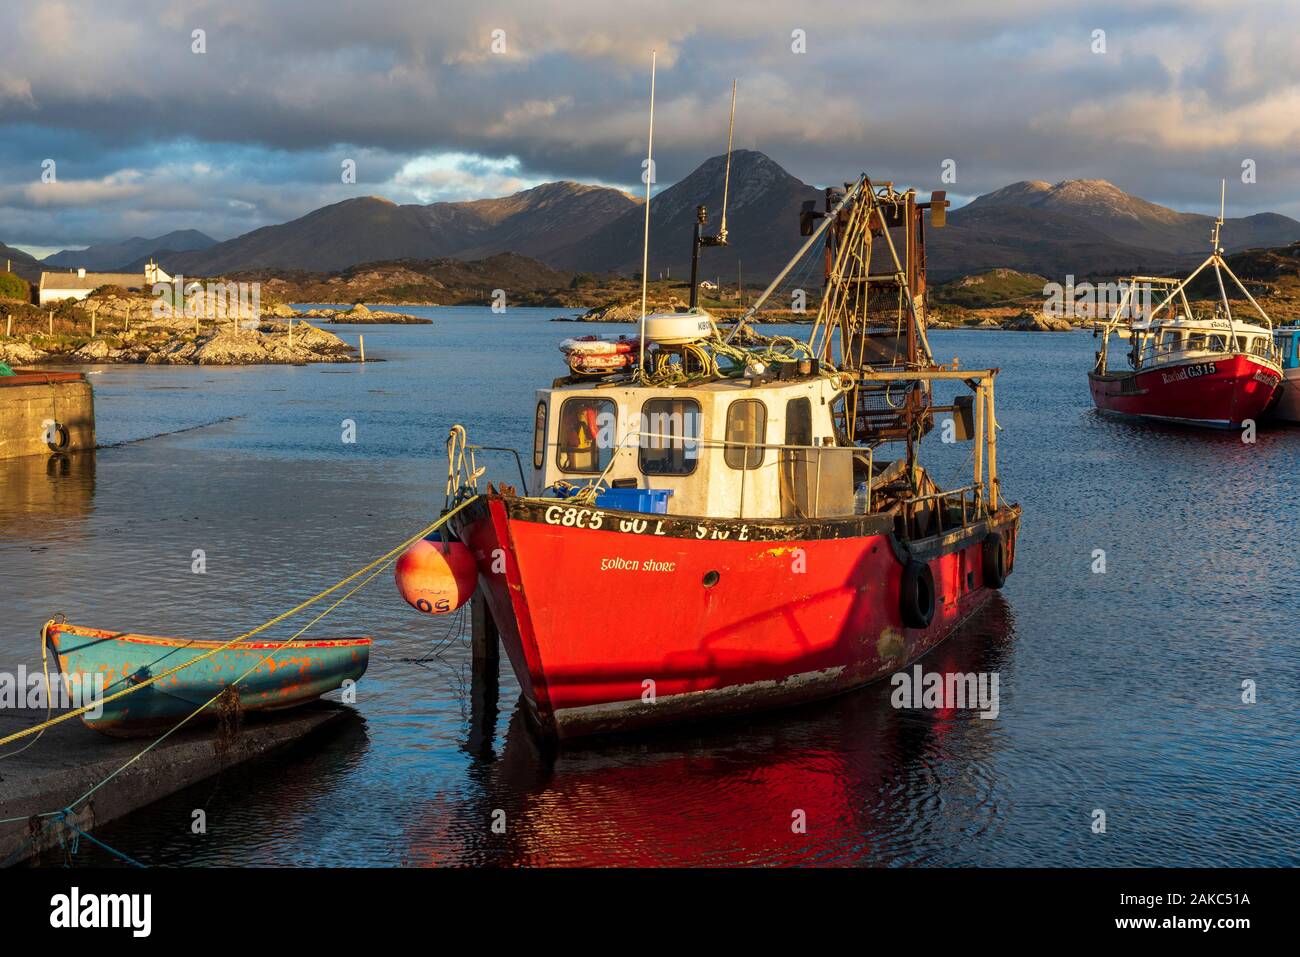 Ireland, County Galway, Connemara, Ballynakill, wooden boats and fishing boats in the harbour, Tully Mountains and Twelve Bens mountains in the background Stock Photo